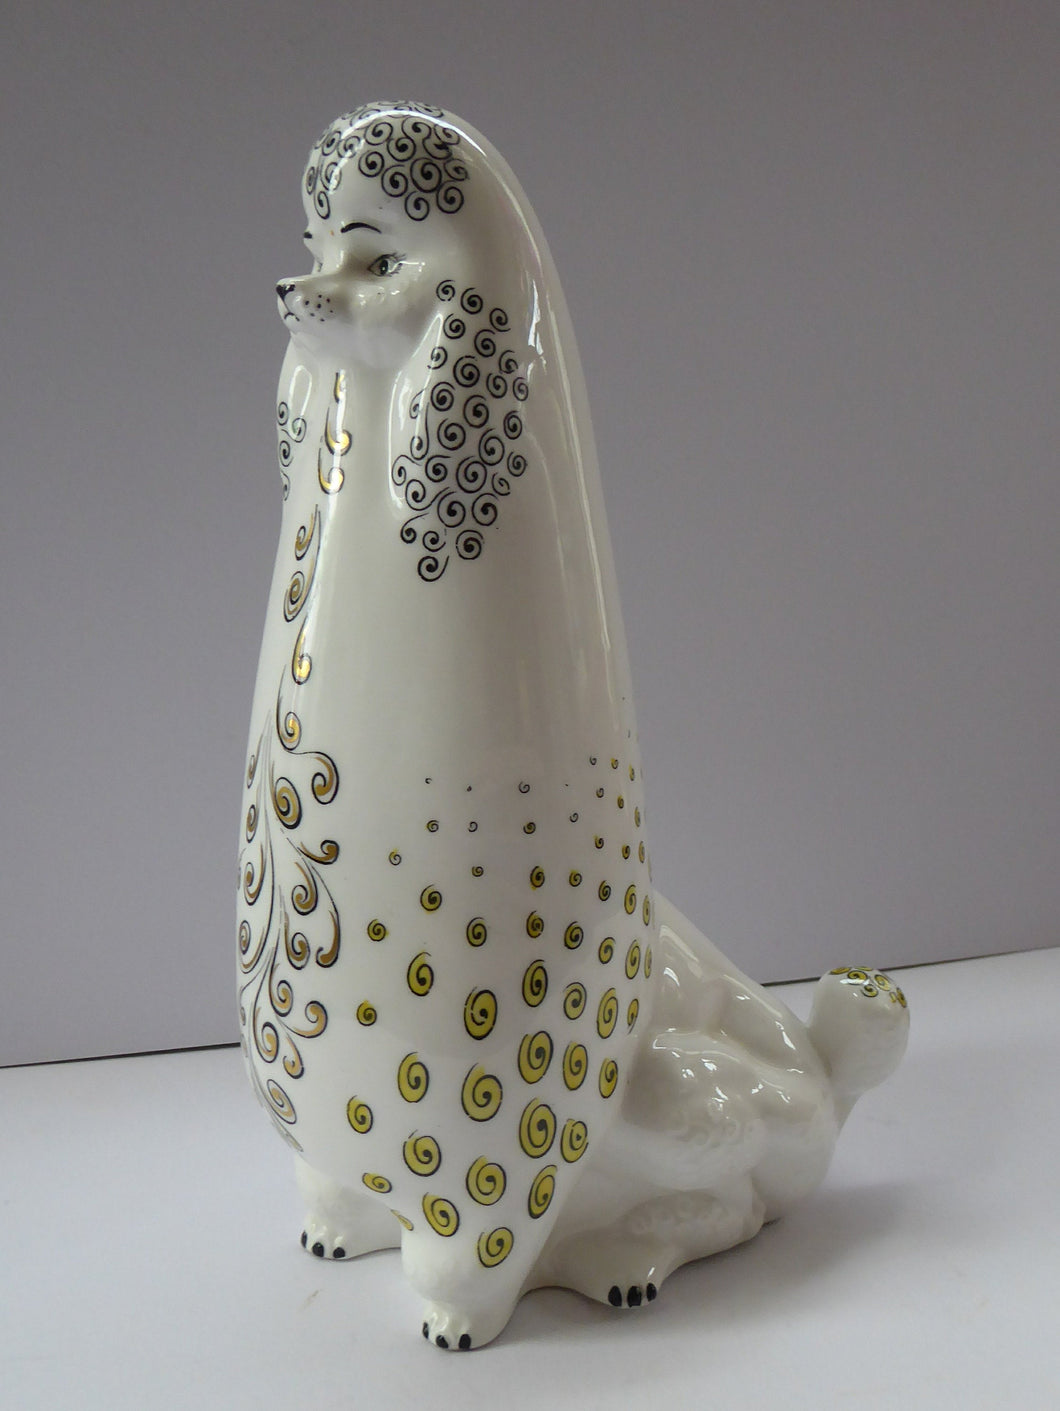 Rare 1950s FOLEY Bone China Stylised POODLE. Abstracted shape with lots of tiny painted curls touched with yellow